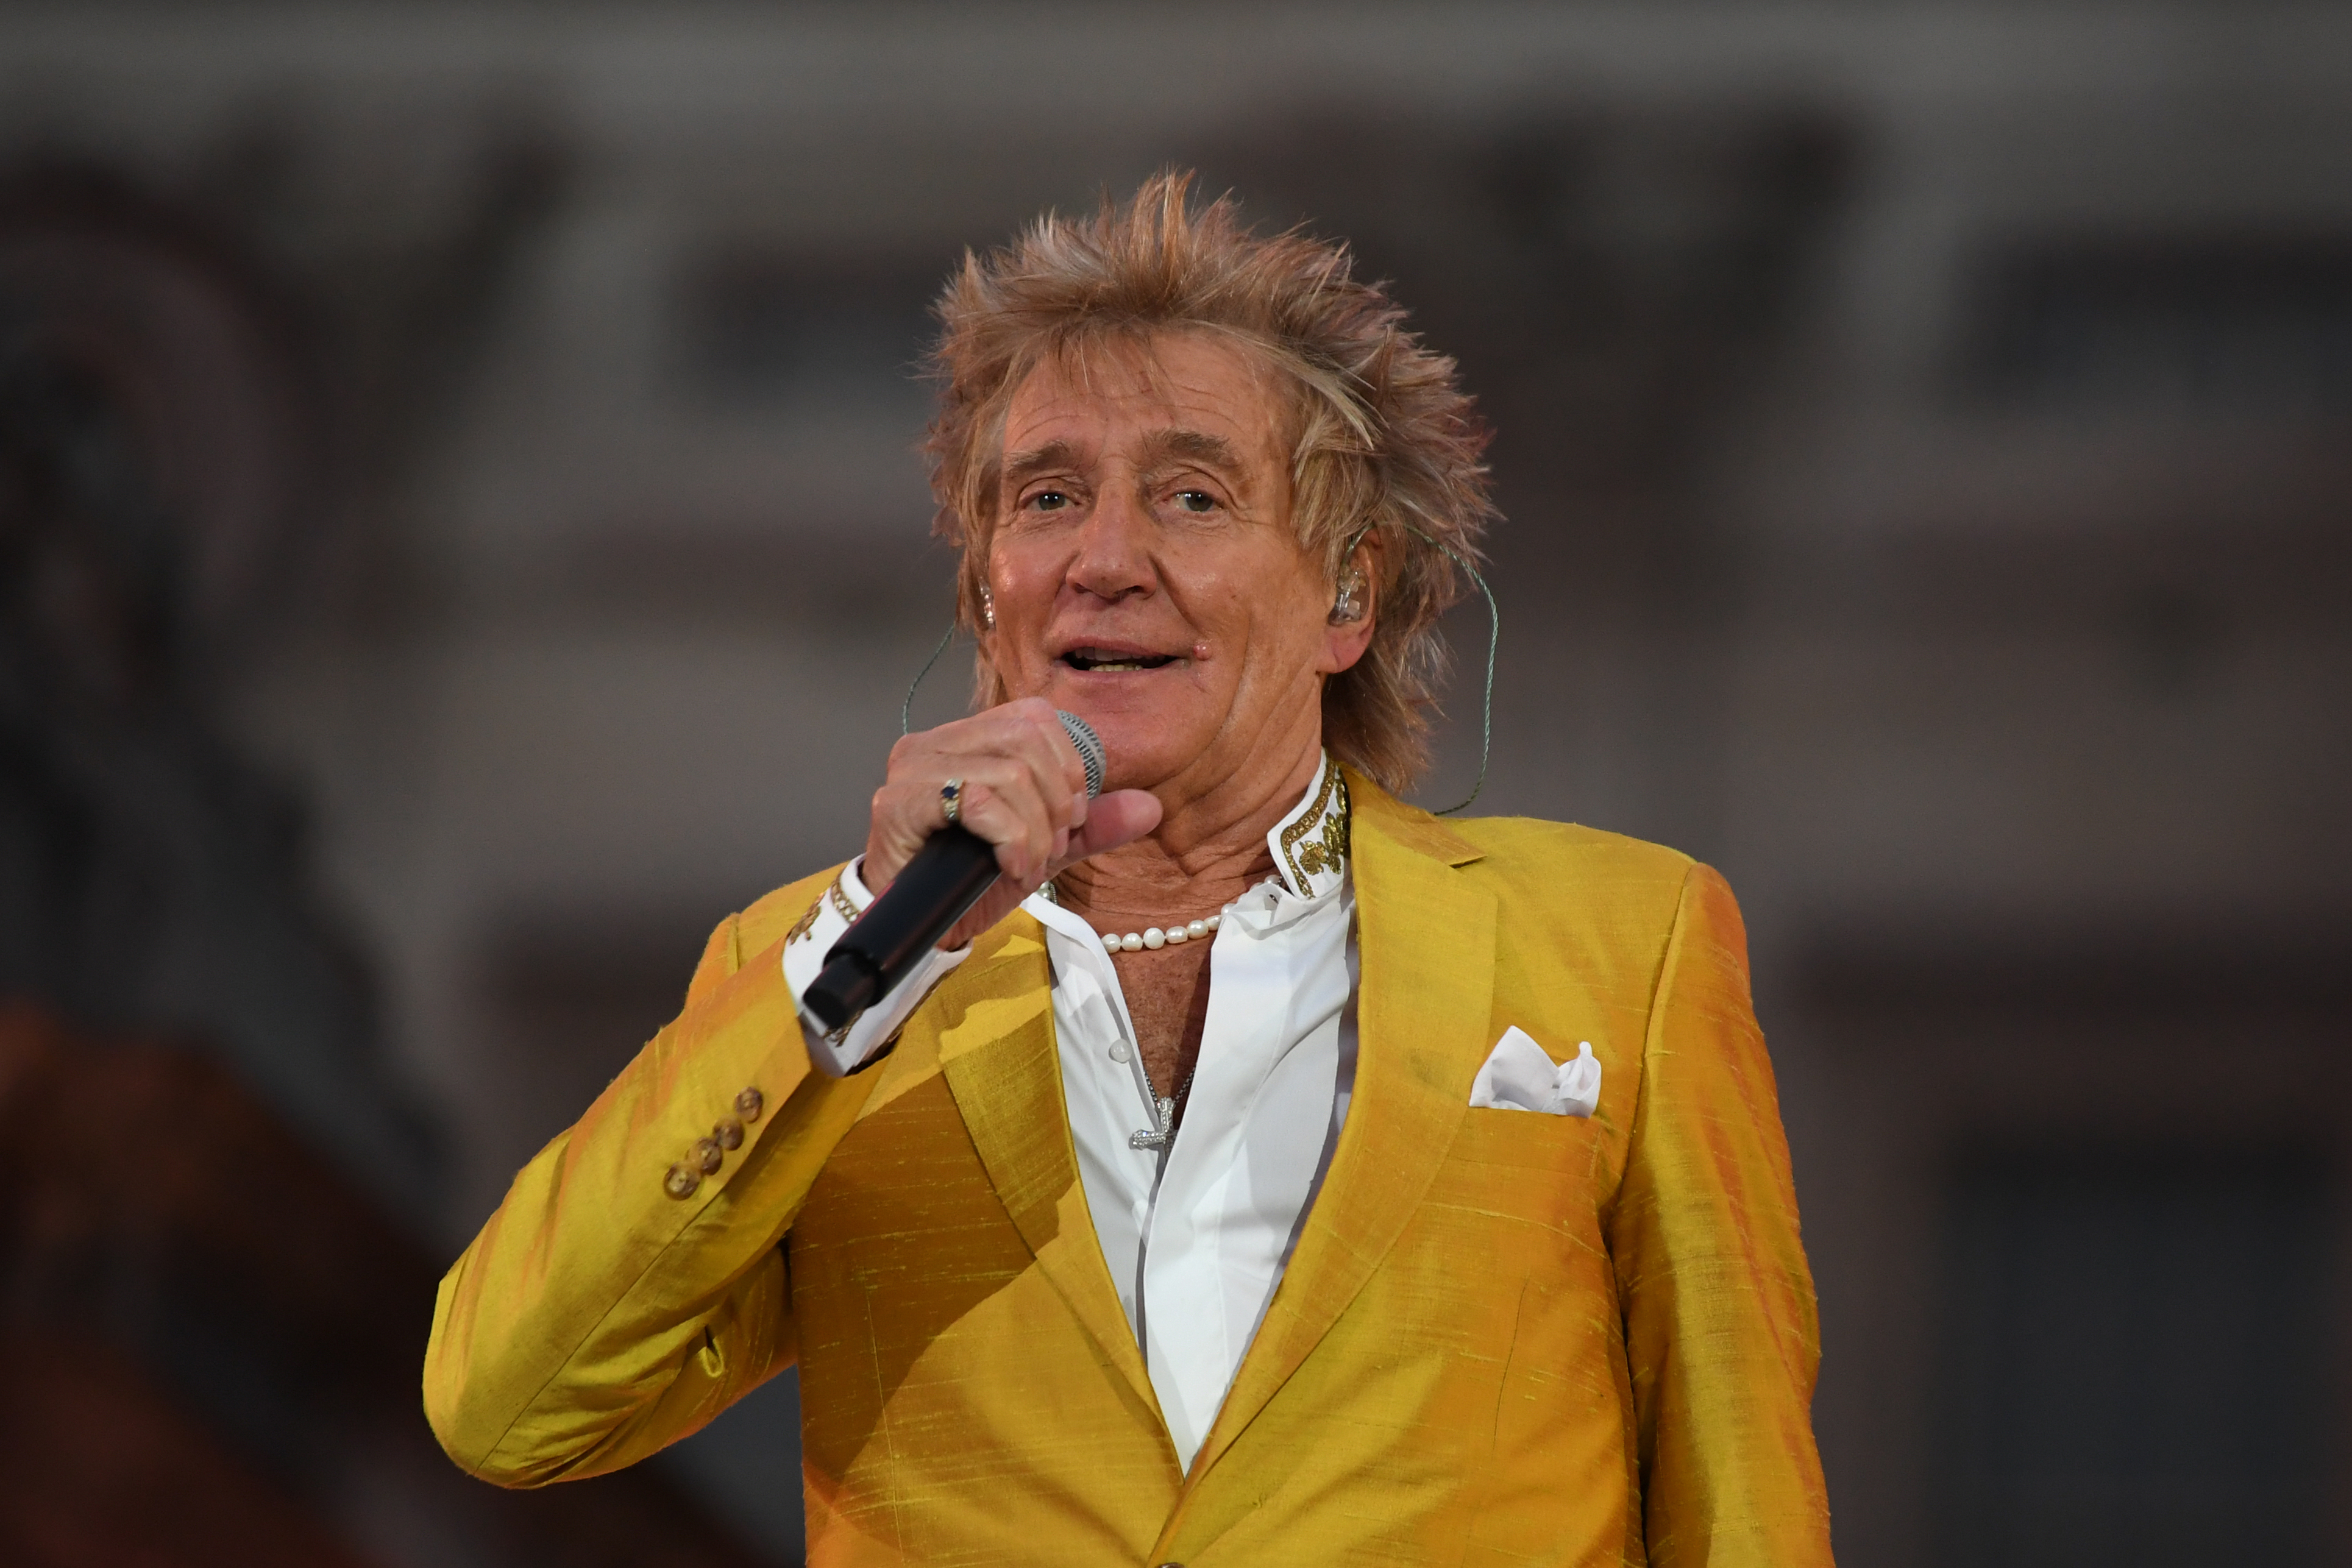 Rod Stewart: Songs, wife, age and more